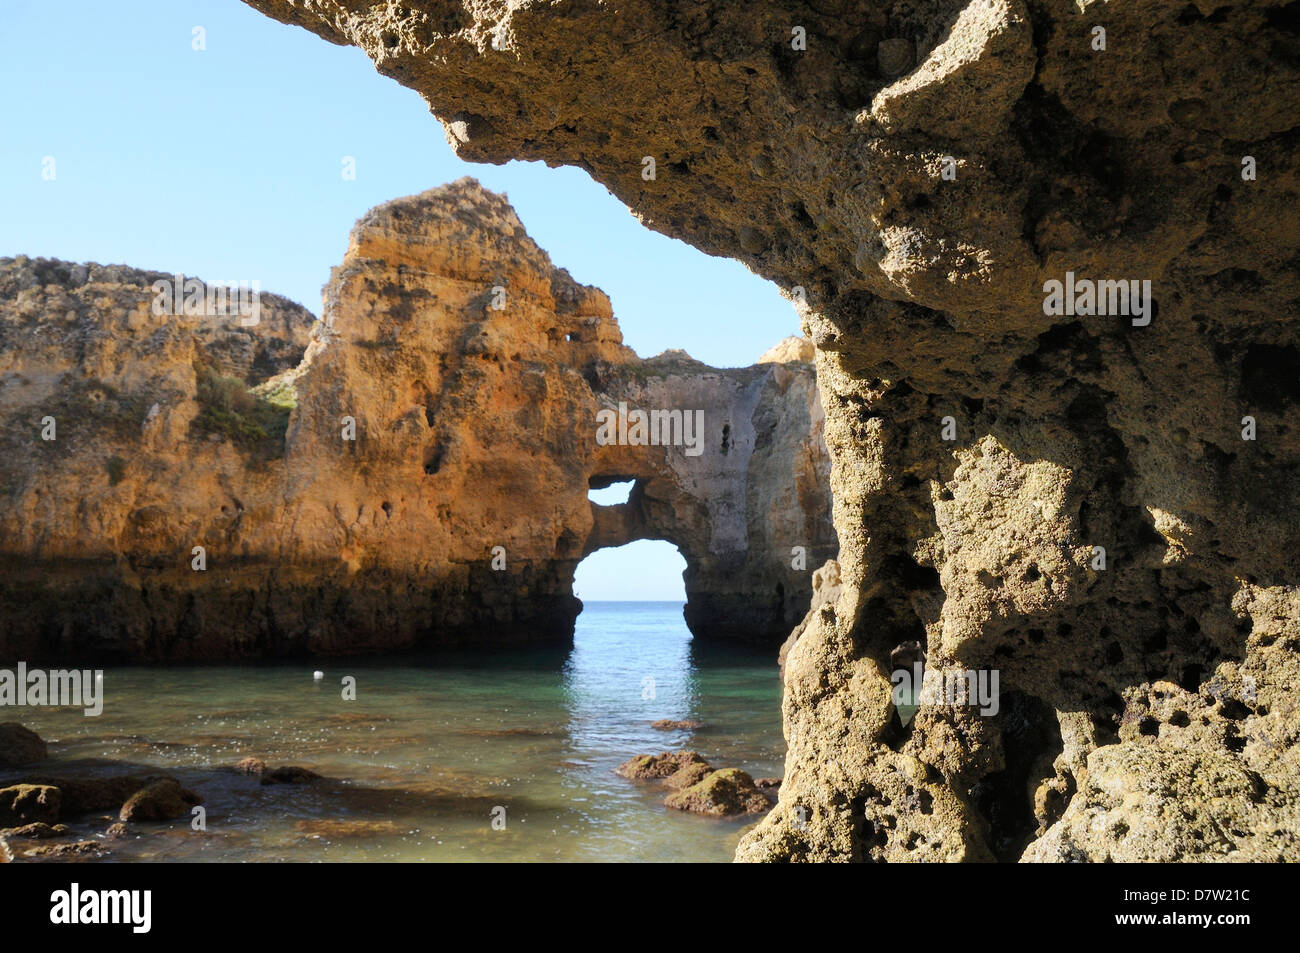 Weathered sandstone rocks and natural archway at Ponta da Piedade at low tide, Lagos, Algarve, Portugal Stock Photo